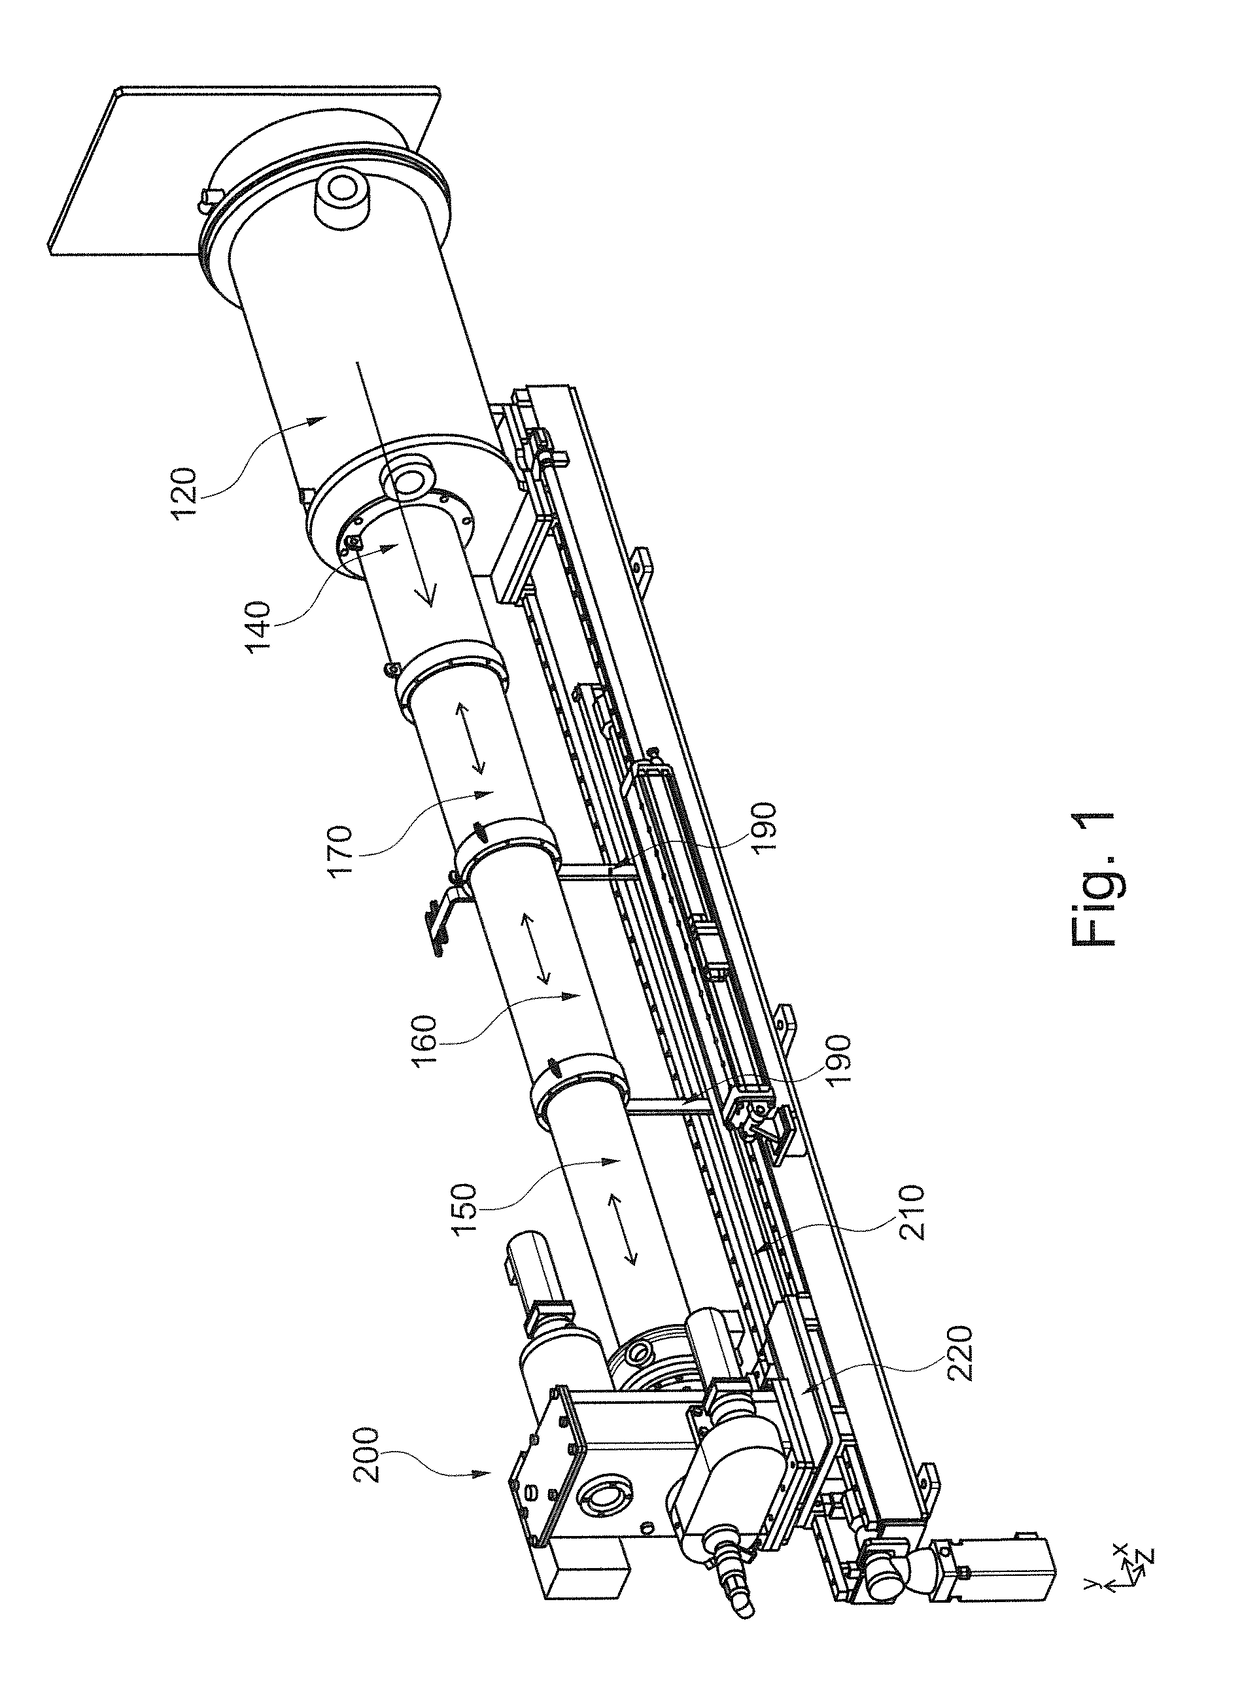 Apparatus and method for coating workpieces